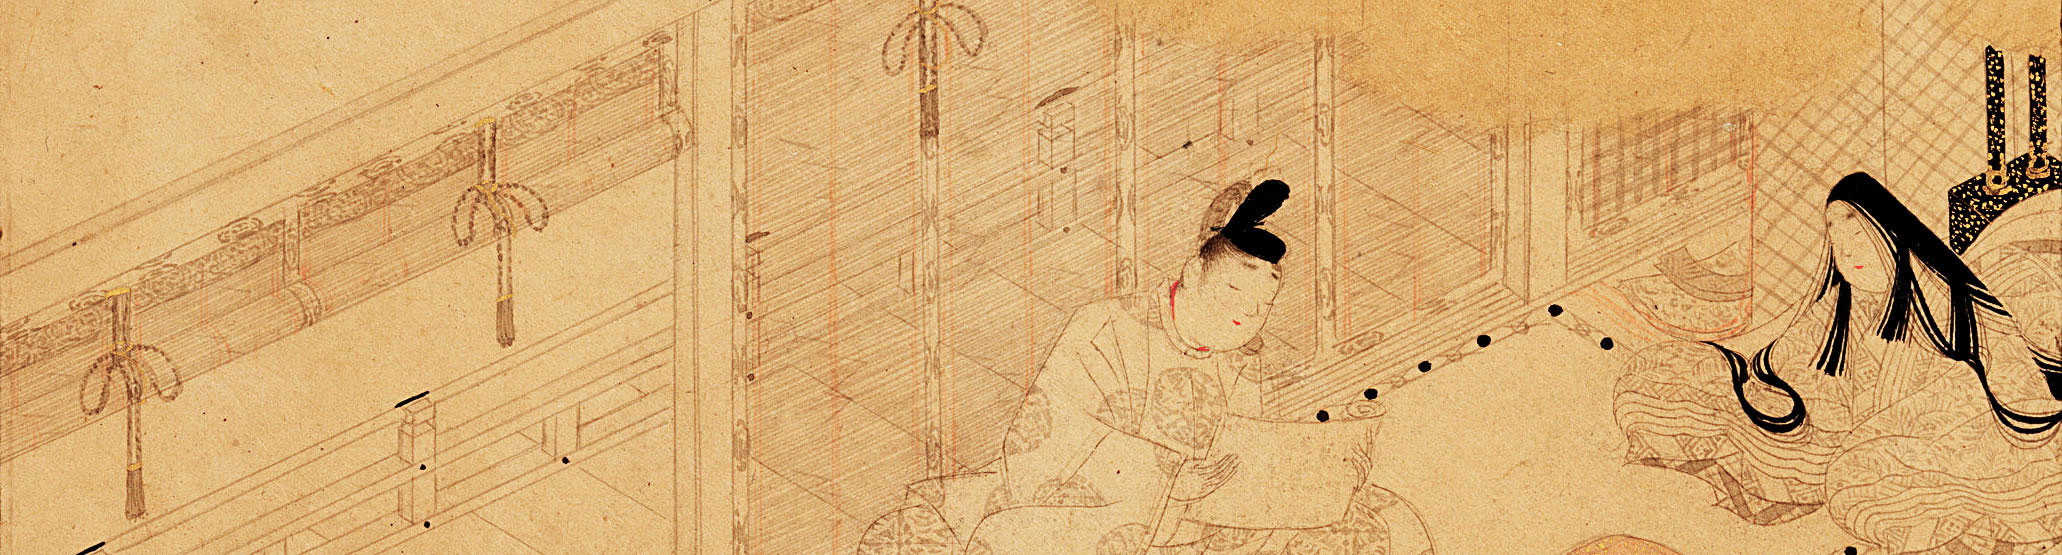 Tosa Mitsunori - Albums of scenes from The Tale of Genji (detail) - early 17th century - The Metropolitan Museum of Art, New York